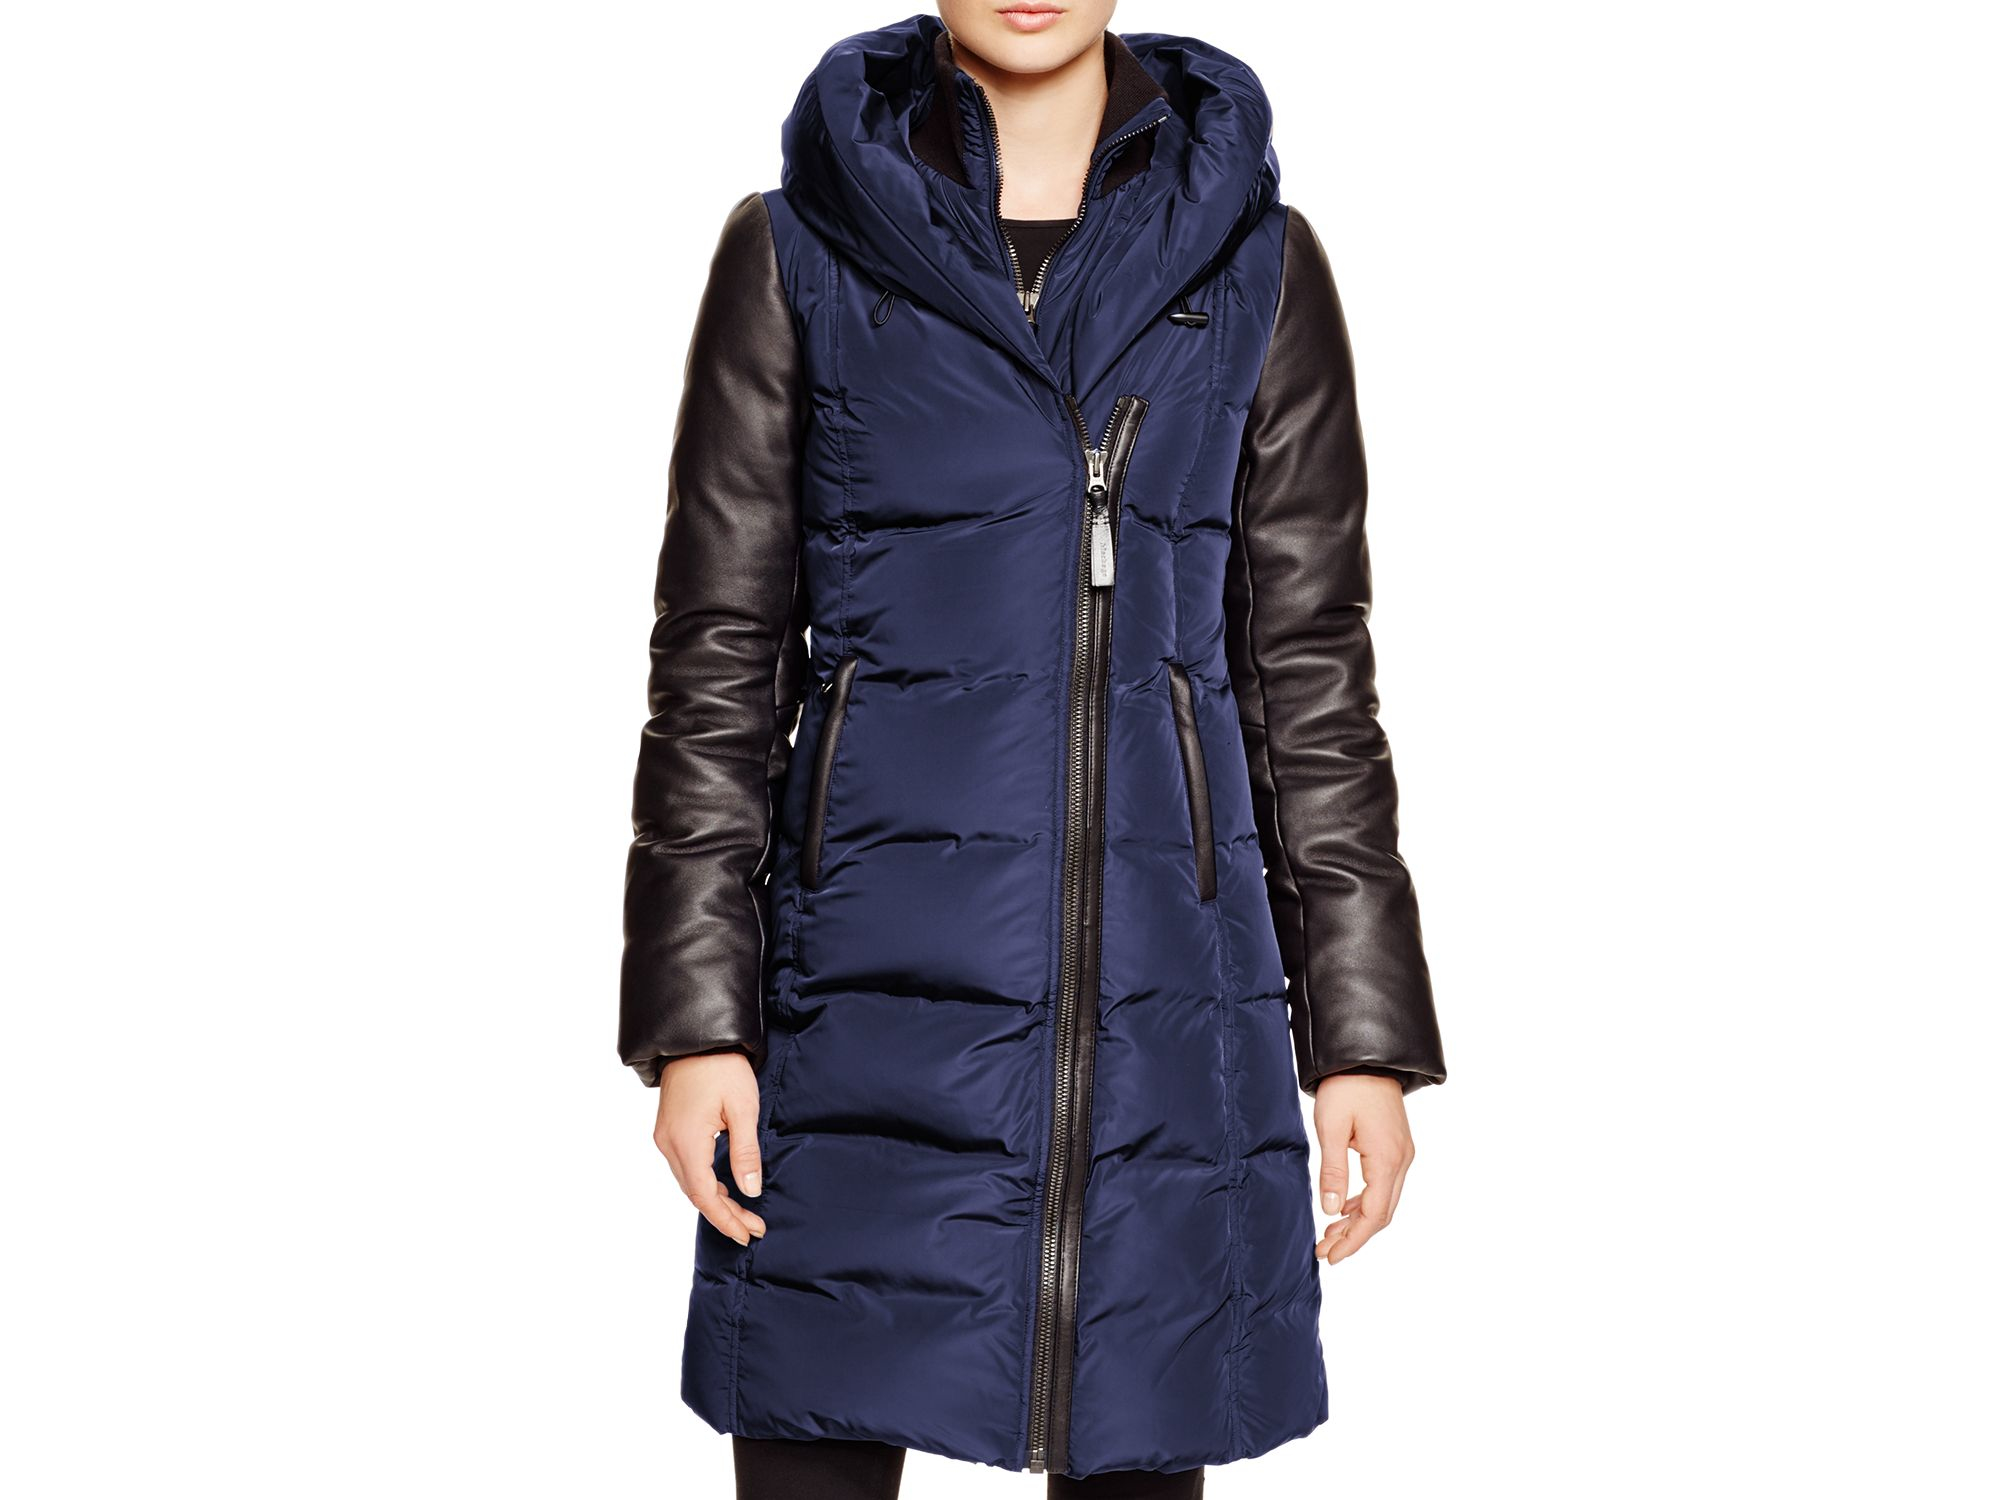 Canada Goose parka replica cheap - Mackage Bonnie Down Coat With Leather Sleeves - Bloomingdale's ...